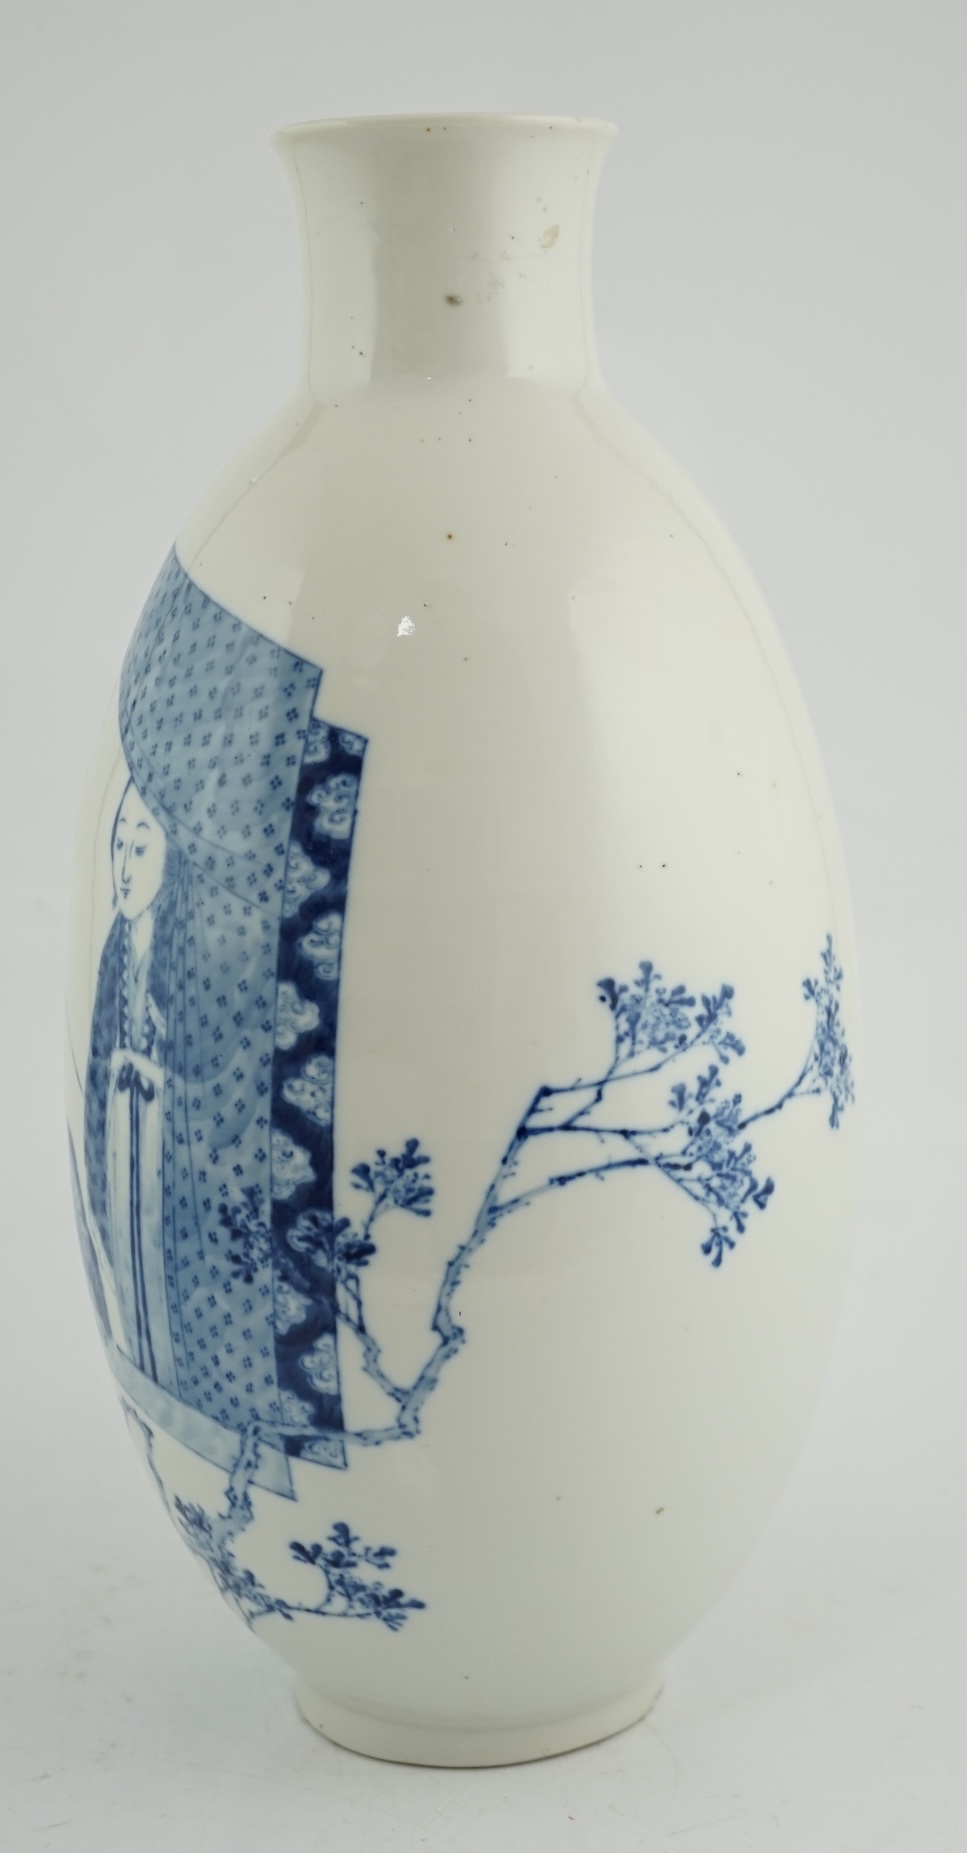 A large Chinese blue and white ovoid vase, early 20th century, firing crack